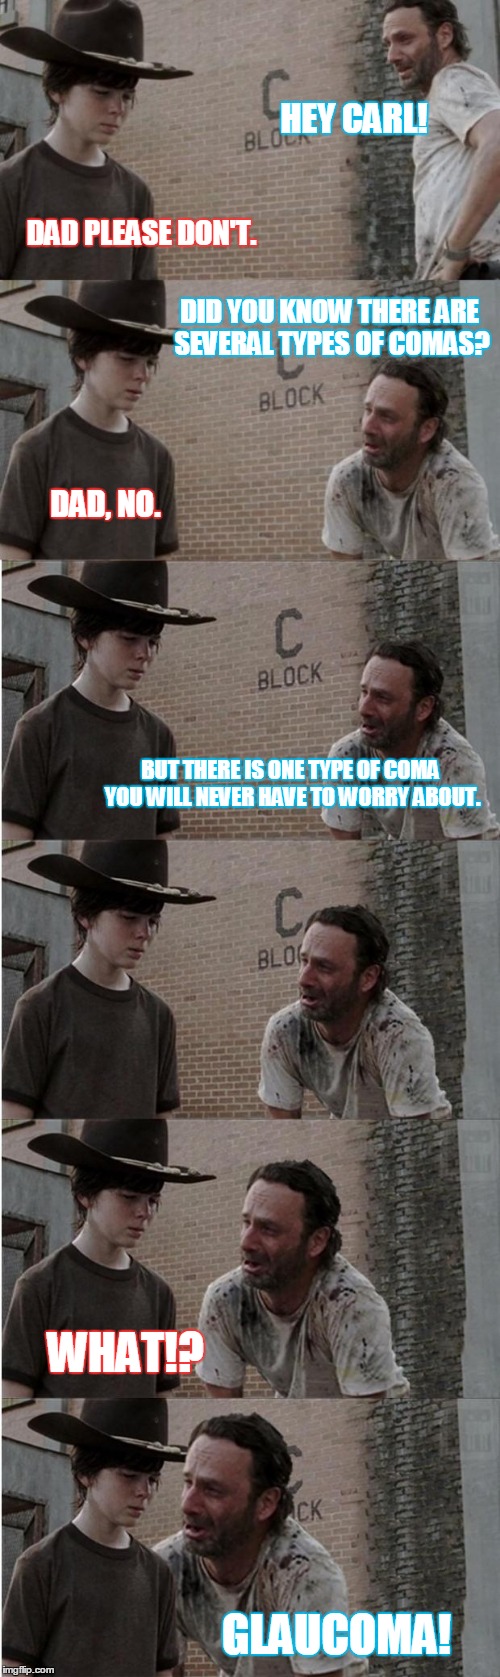 Rick and Carl Longer | HEY CARL! DAD PLEASE DON'T. DID YOU KNOW THERE ARE SEVERAL TYPES OF COMAS? DAD, NO. BUT THERE IS ONE TYPE OF COMA YOU WILL NEVER HAVE TO WORRY ABOUT. WHAT!? GLAUCOMA! | image tagged in memes,rick and carl longer | made w/ Imgflip meme maker